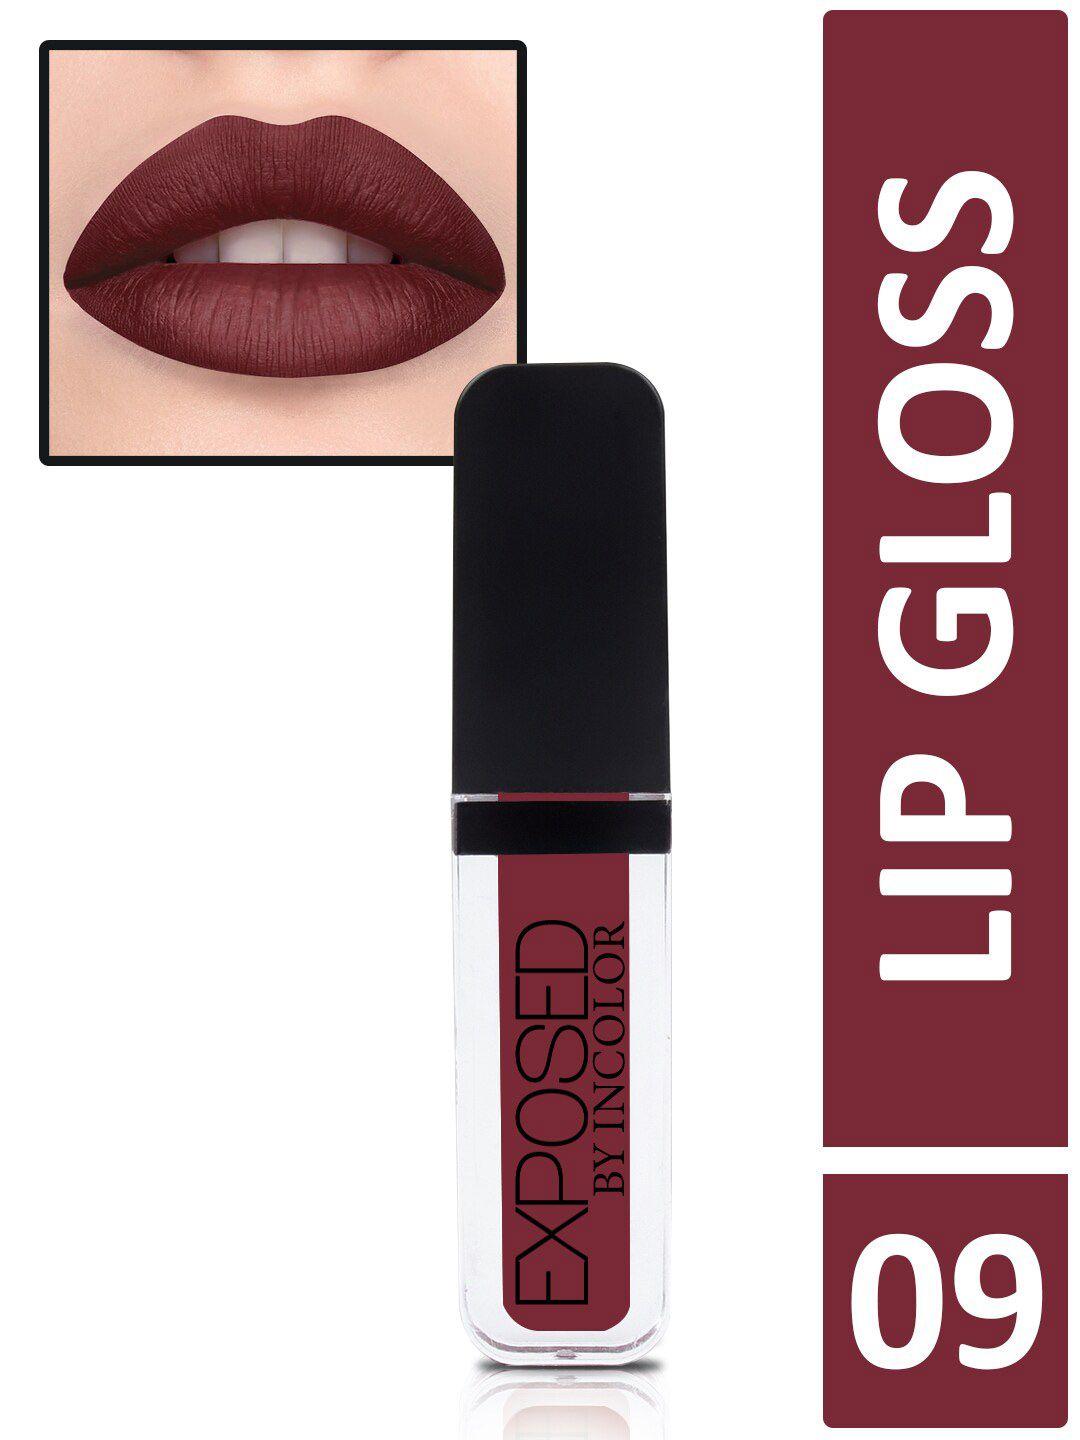 incolor exposed soft matte lip gloss 09 6 ml